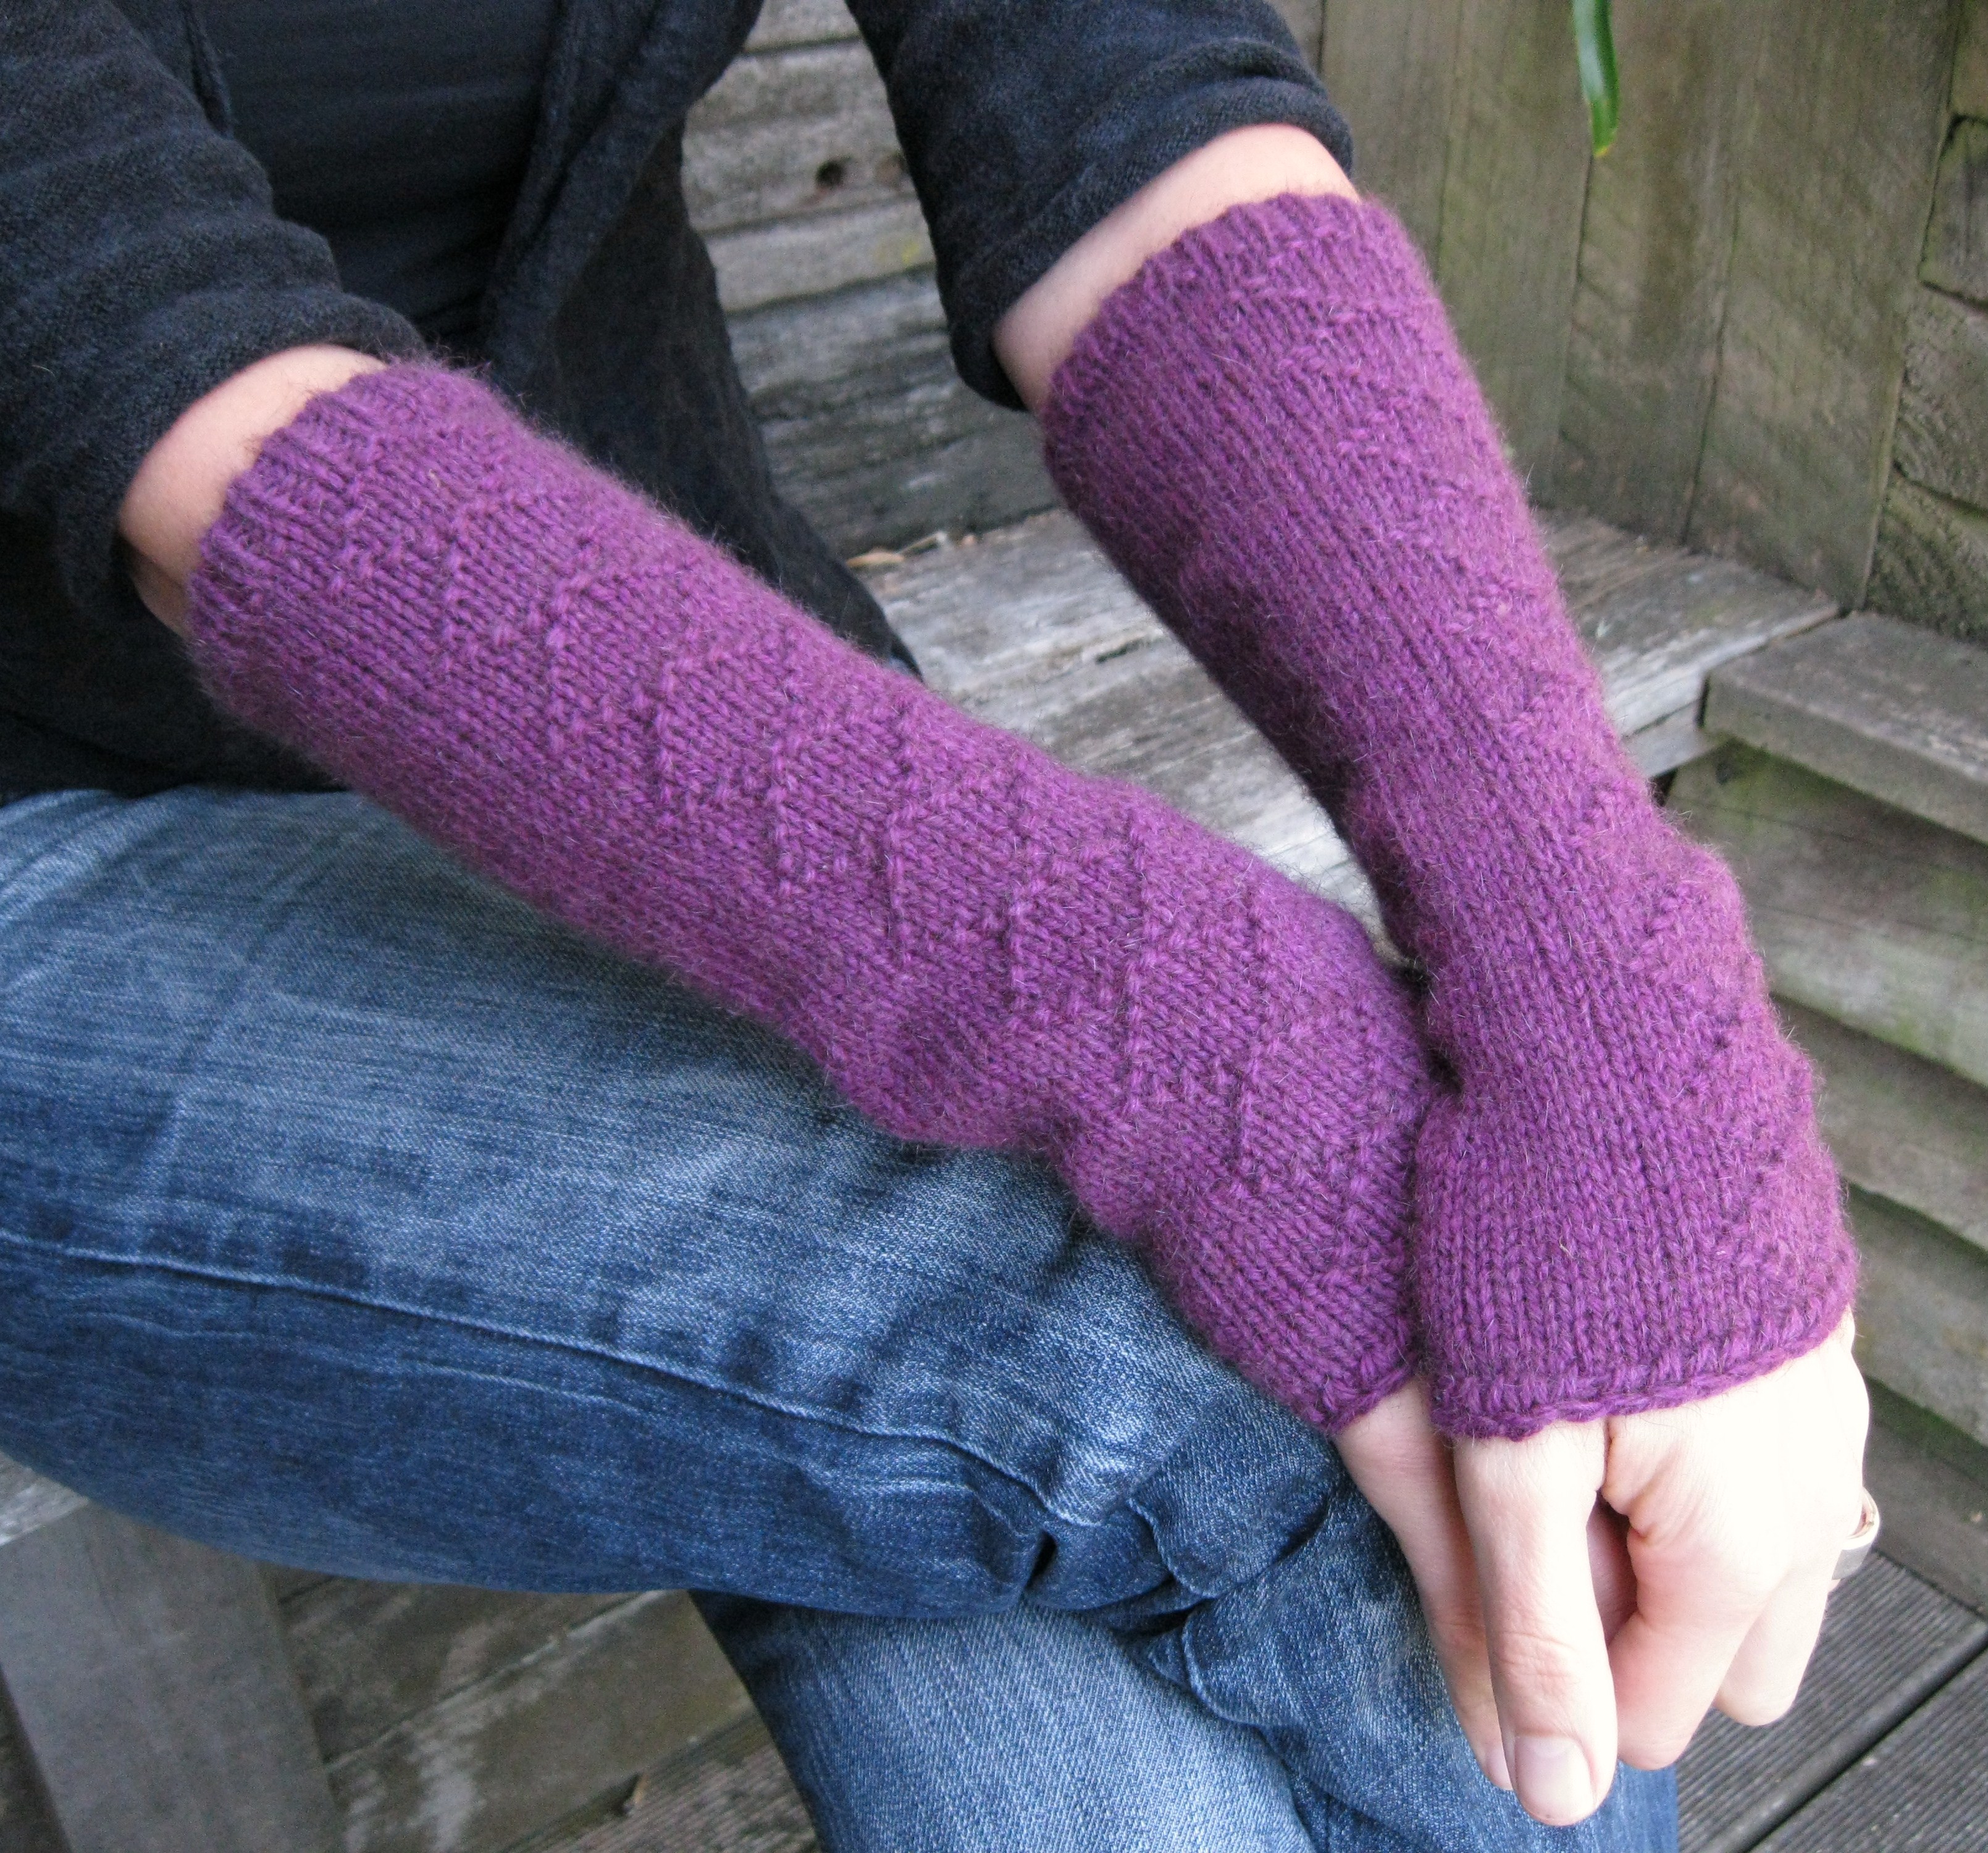 Crocheted Arm Warmer Pattern - Yahoo! Voices - voices.yahoo.com